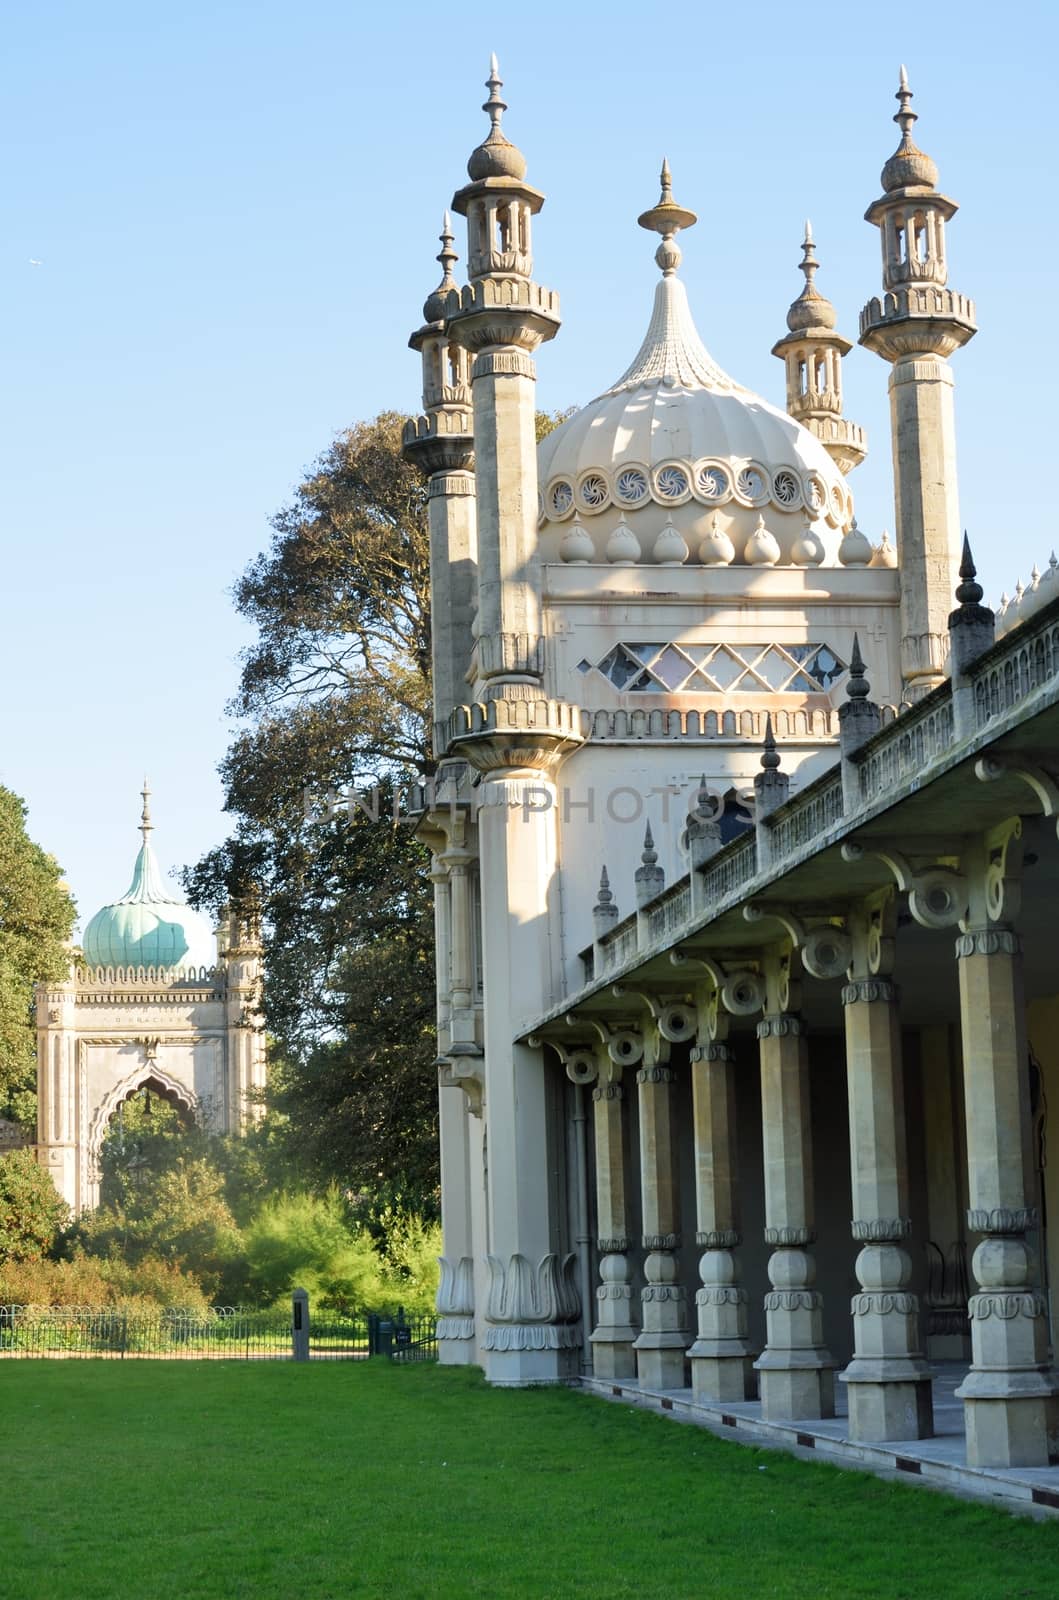 Brighton Pavilion from side